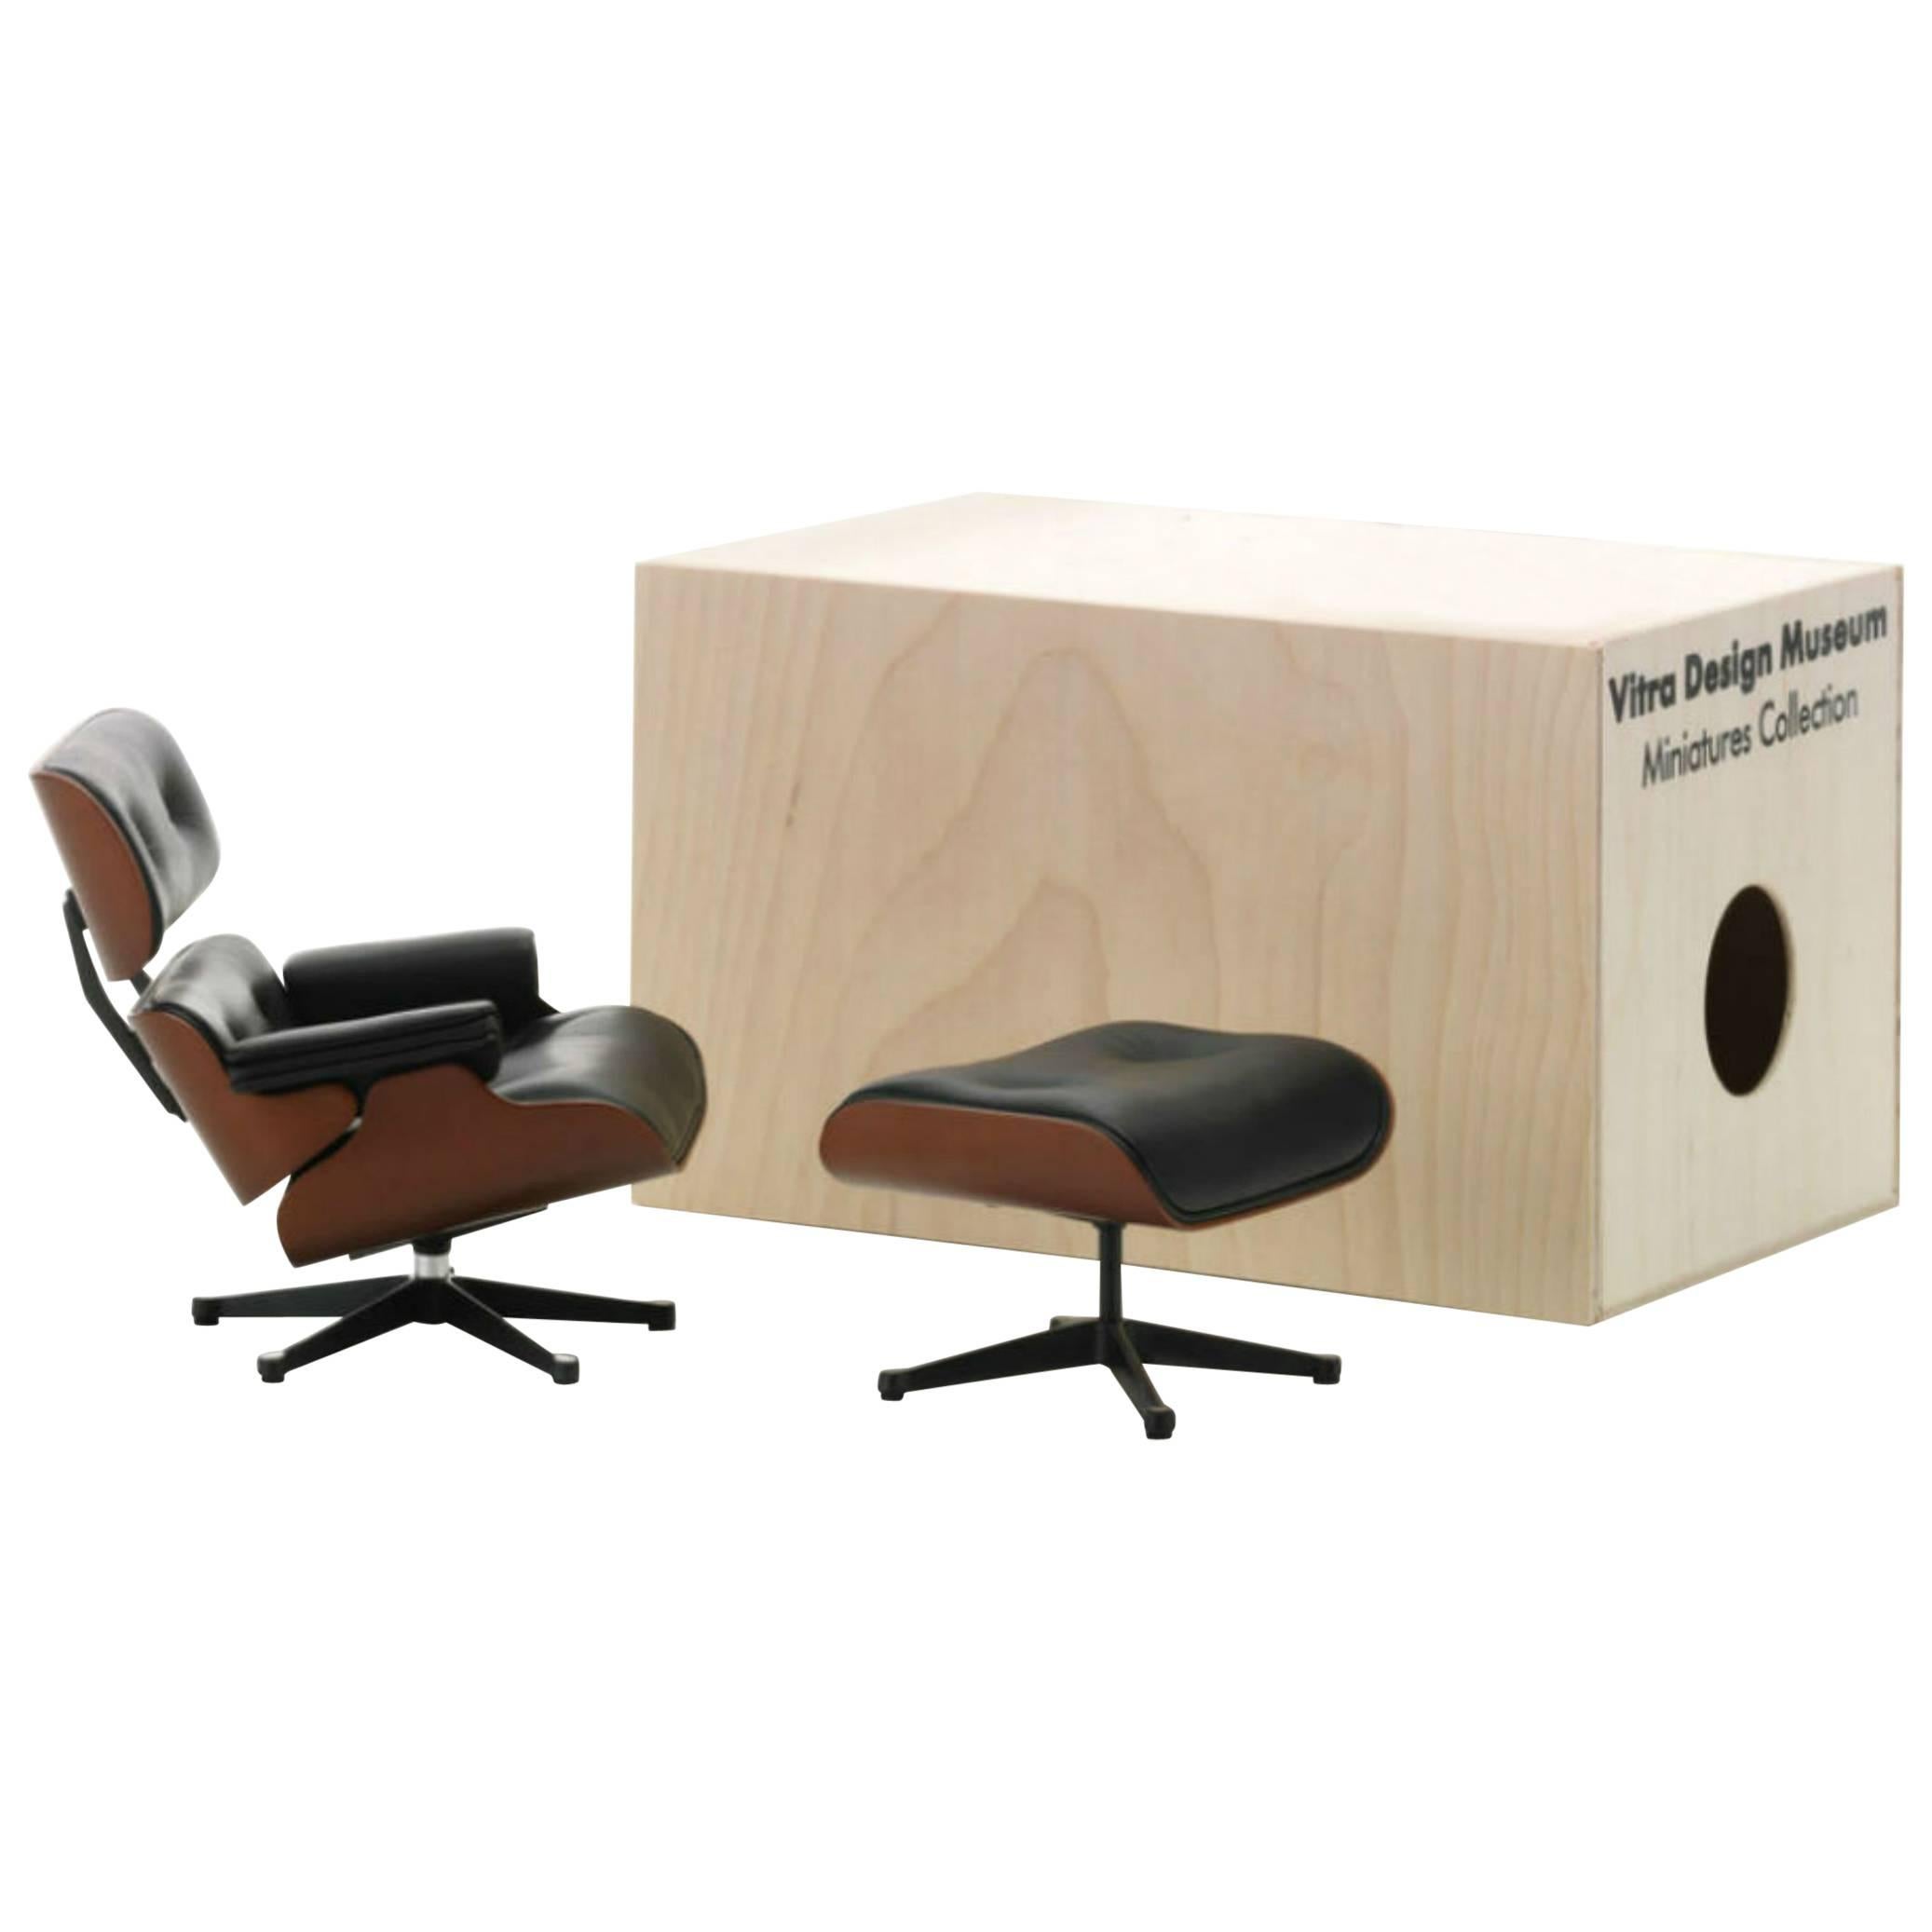 Vitra Miniature Eames Lounge Chair and Ottoman in as New Condition